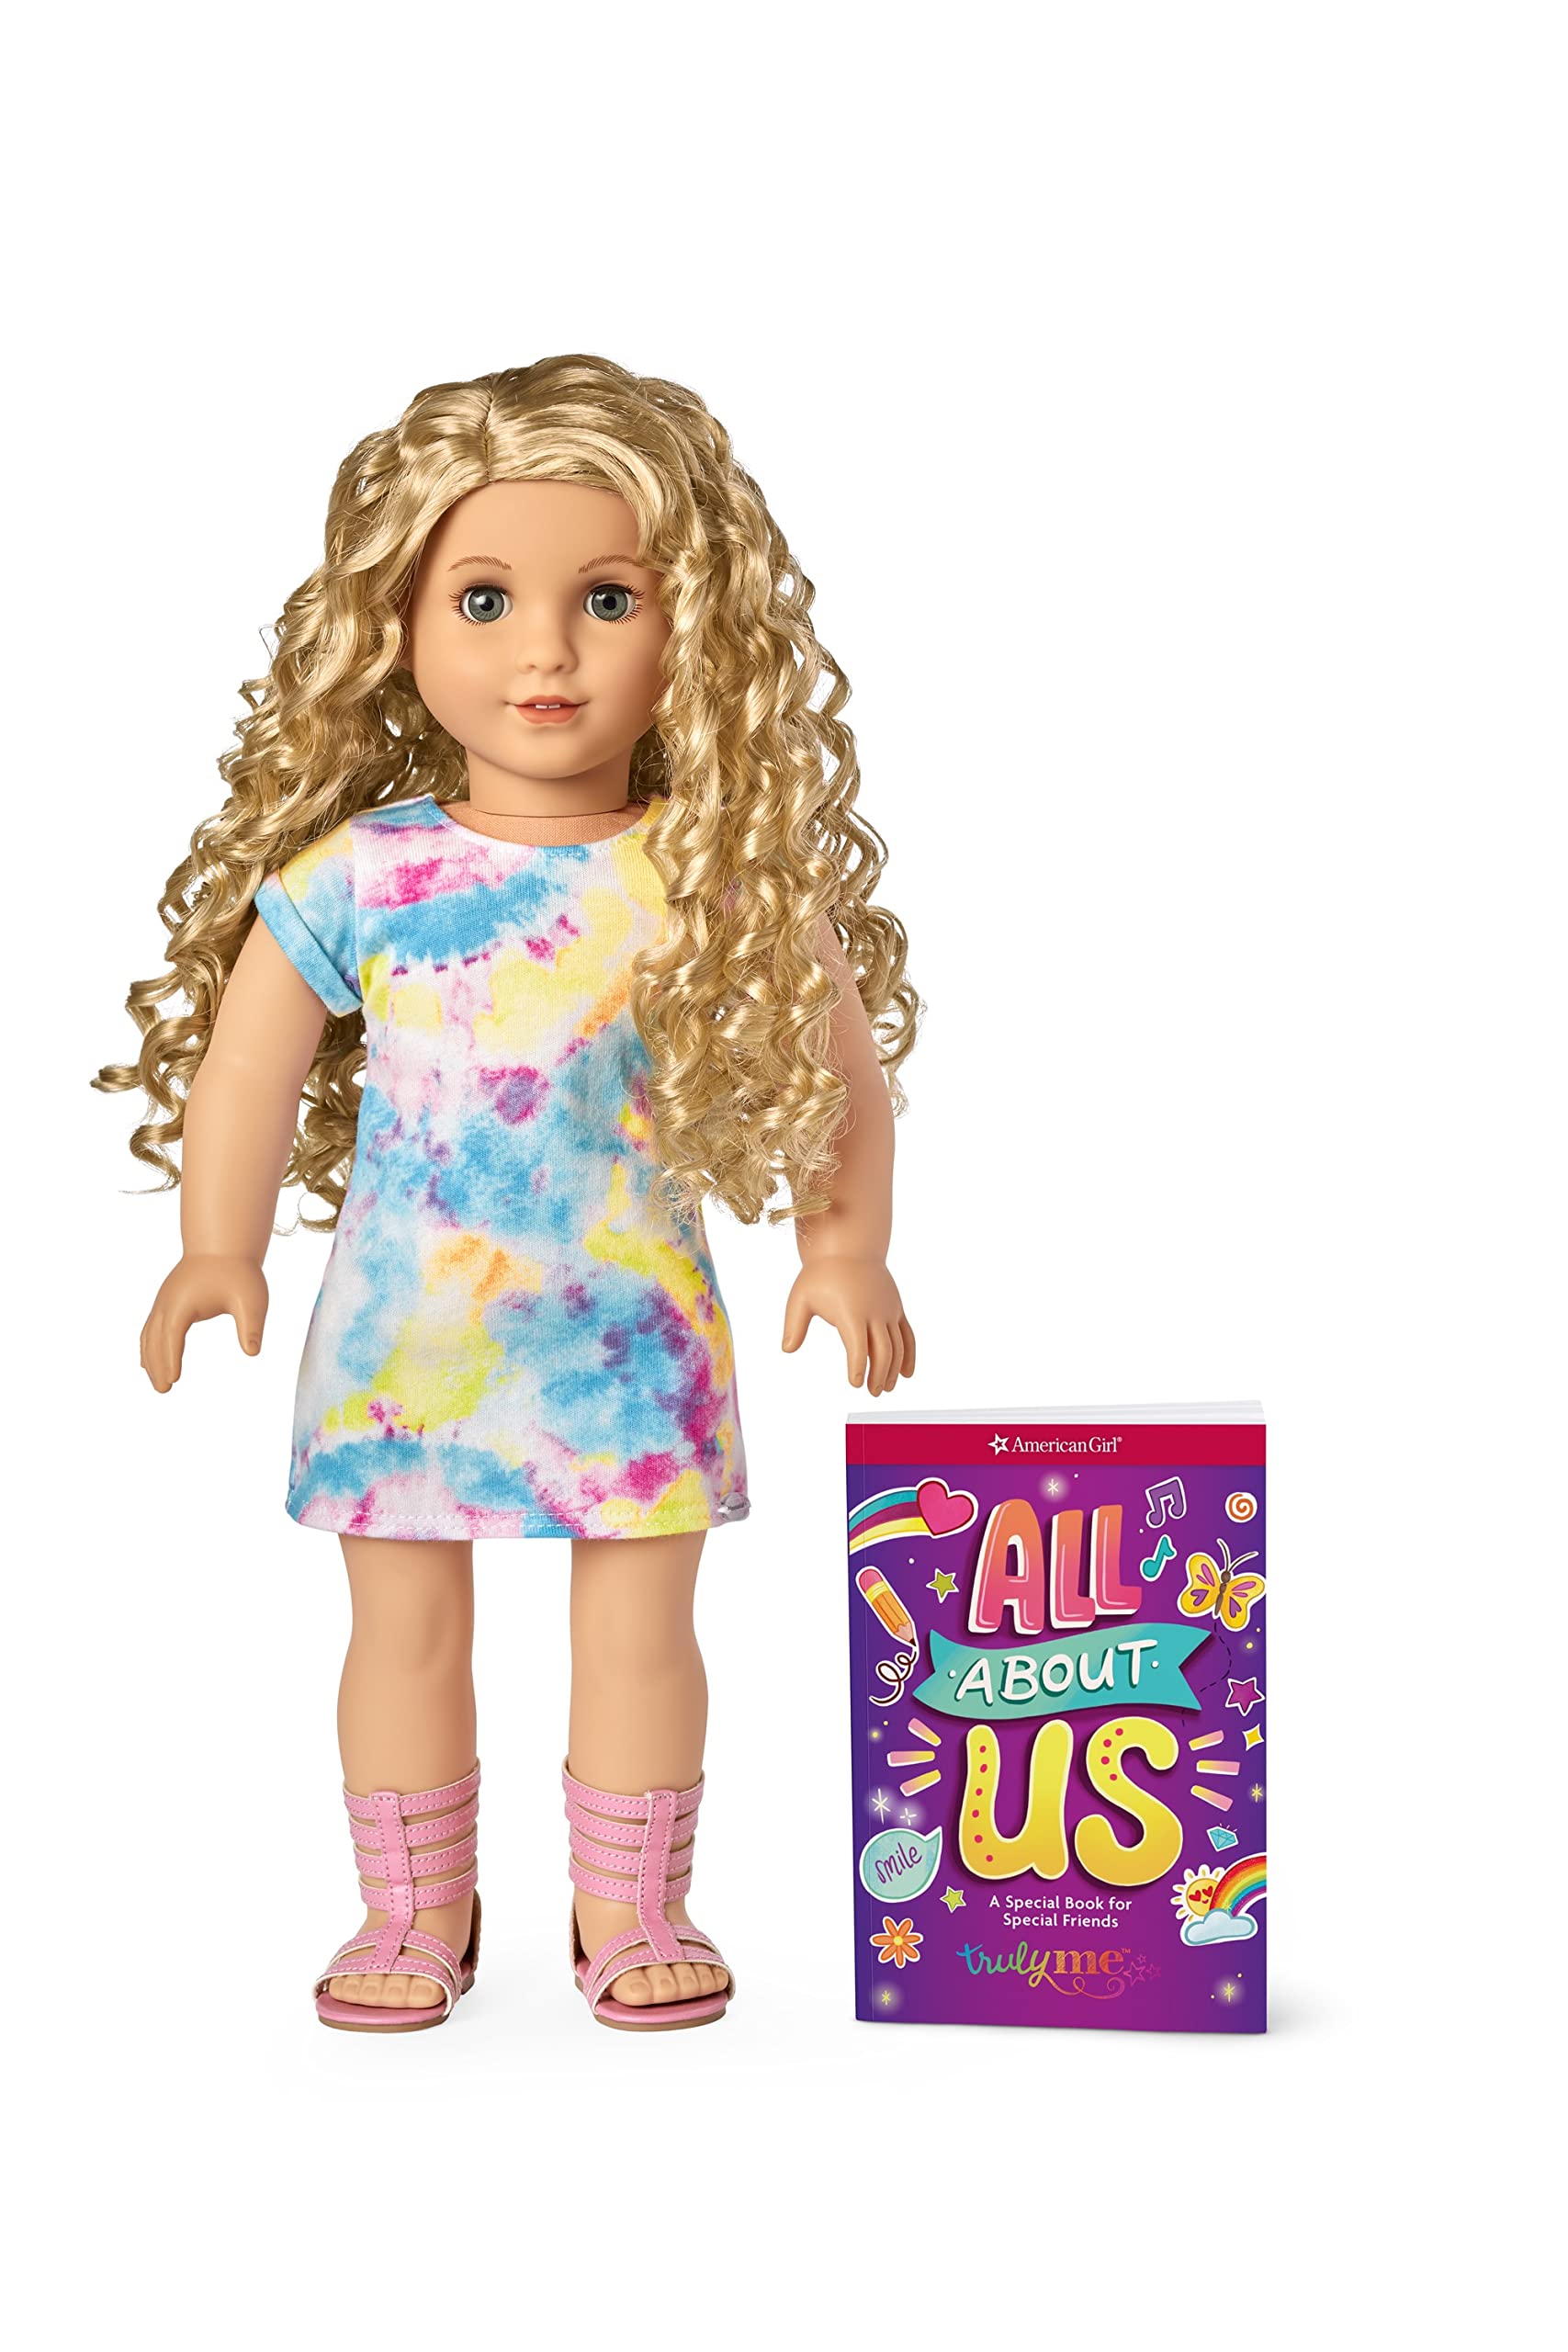 American Girl Truly Me 18-Inch Doll 115 with Gray Eyes, Curly Blonde Hair, Light Skin with Warm Olive Undertones, Tie Dye T-Shirt Dress